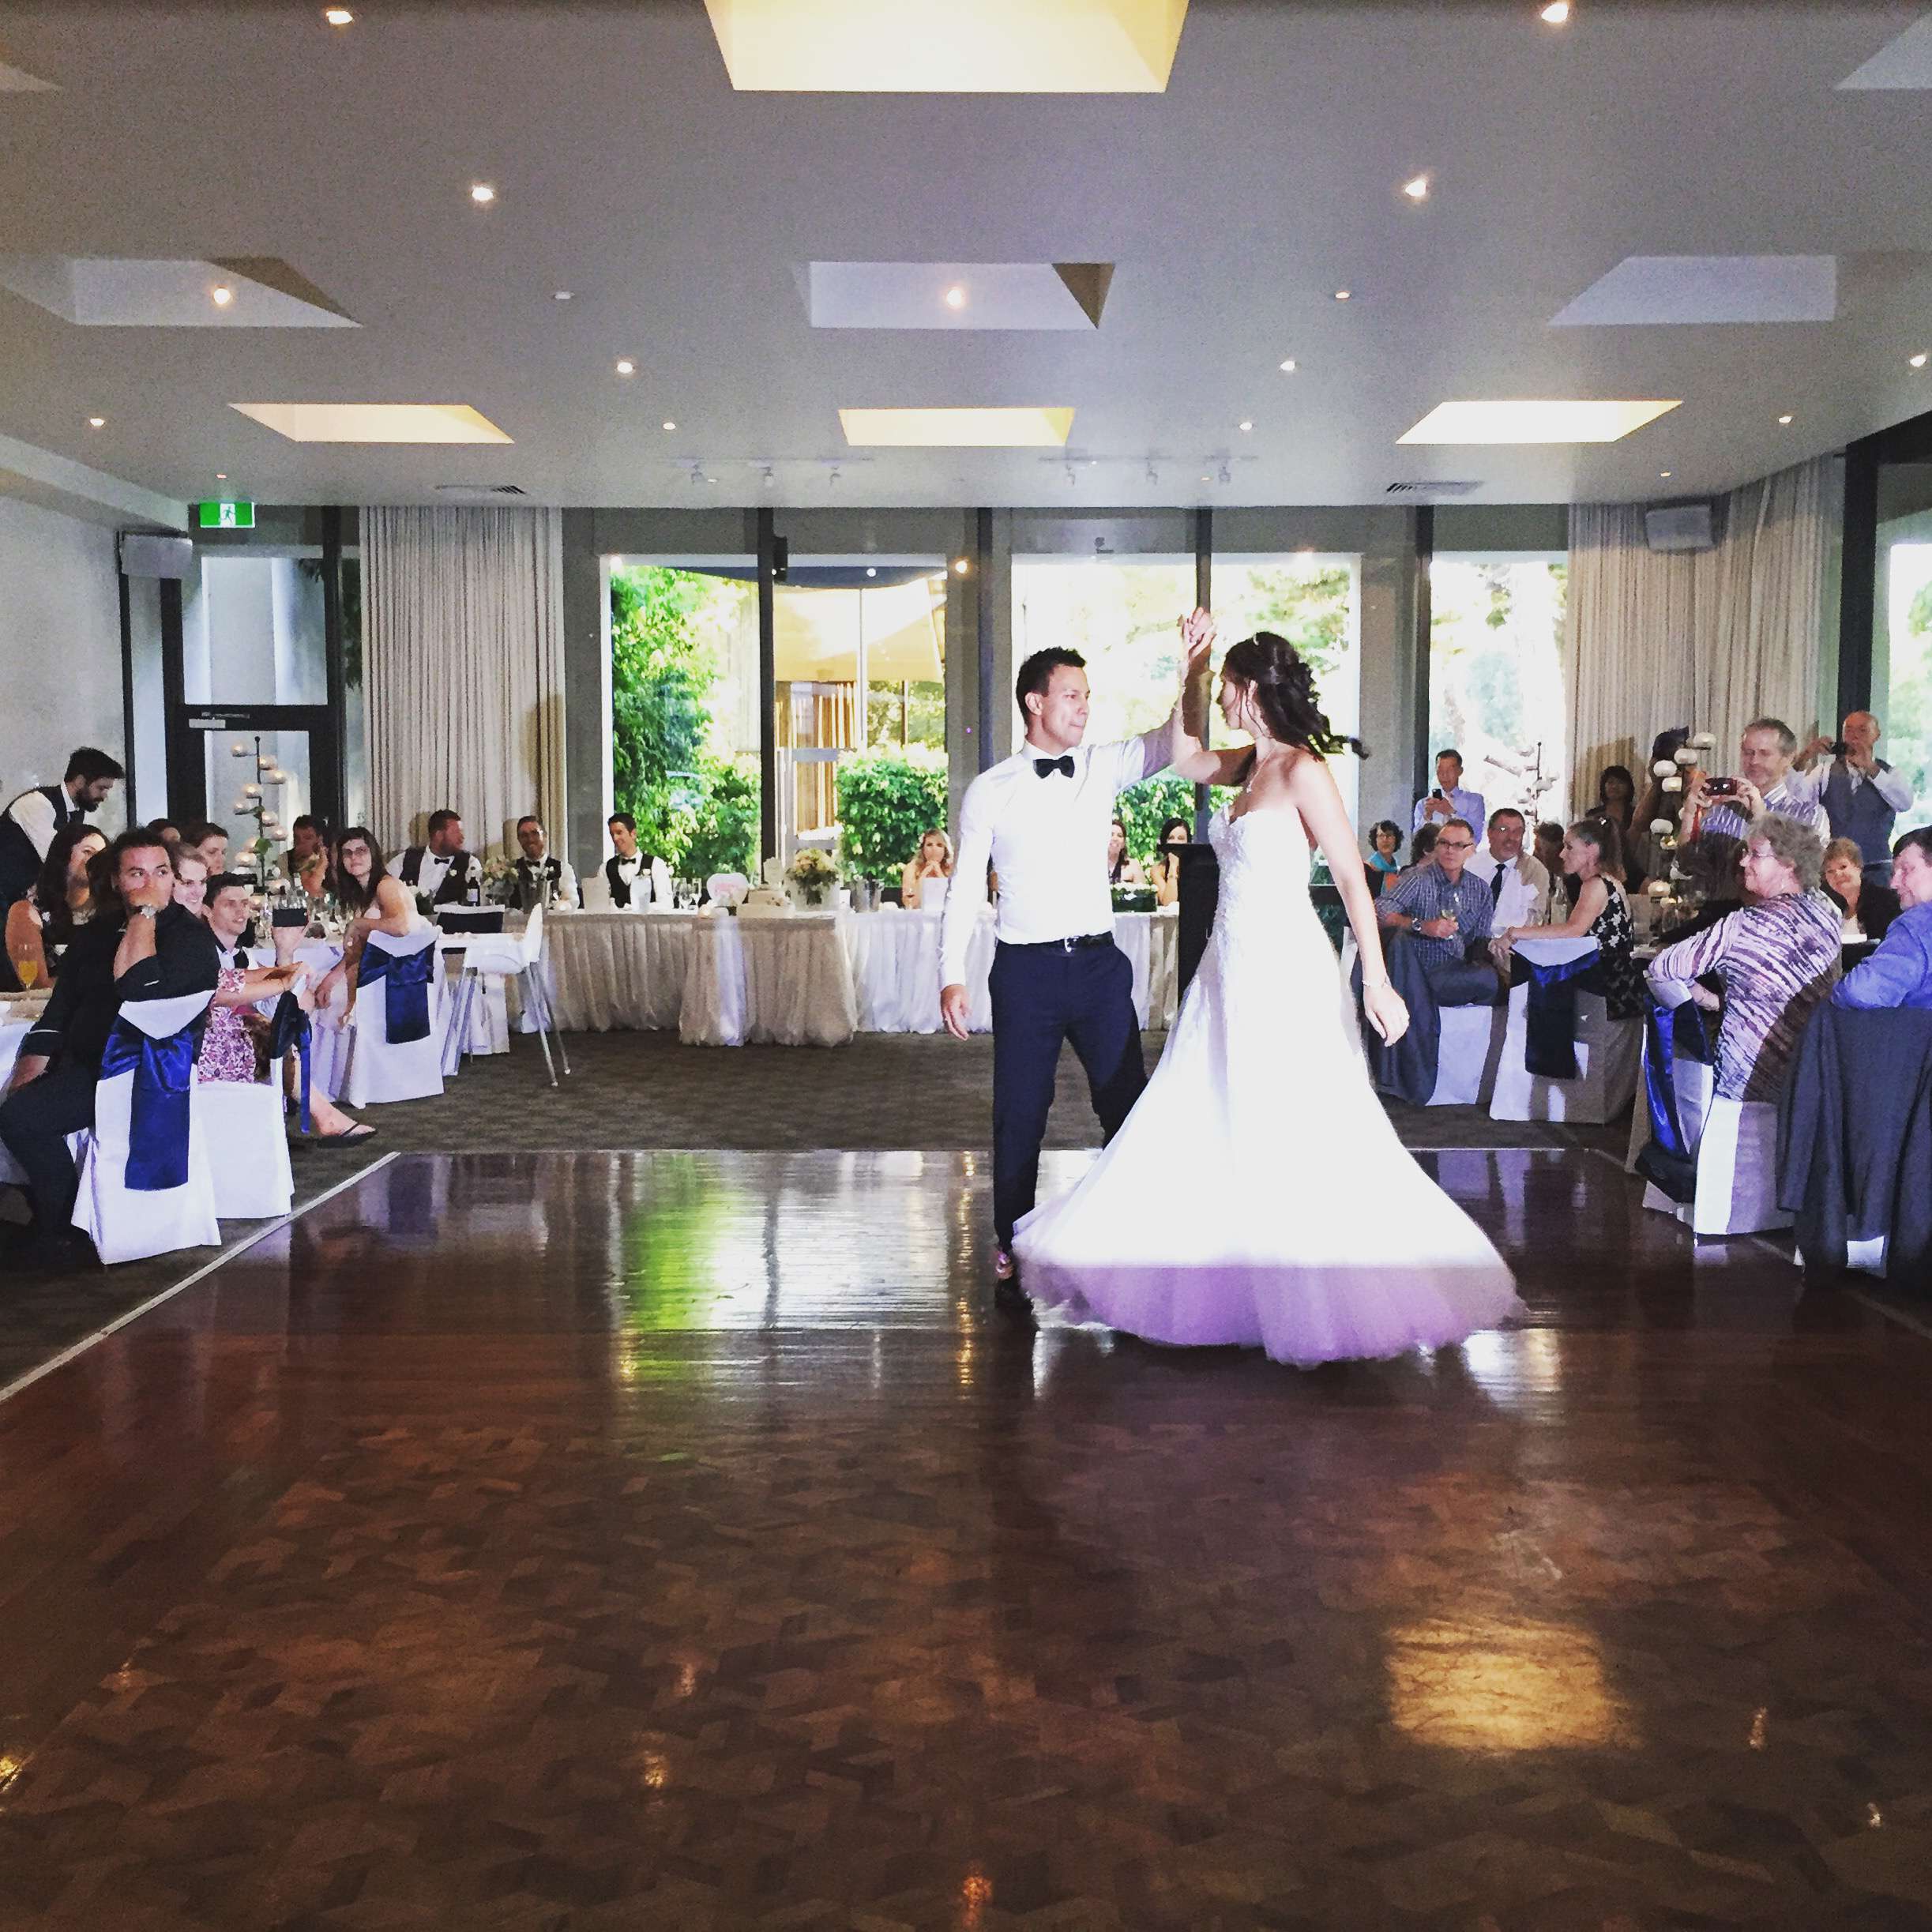 Wedding DJ Melbourne Wedding DJ in Melbourne with first class entertainment, wedding dresses and songs. We have Professional DJ's available who have been hand picked to ensure. For more info at https://www.mercurydjhire.com.au/weddings.html
 by Mercurydjhire